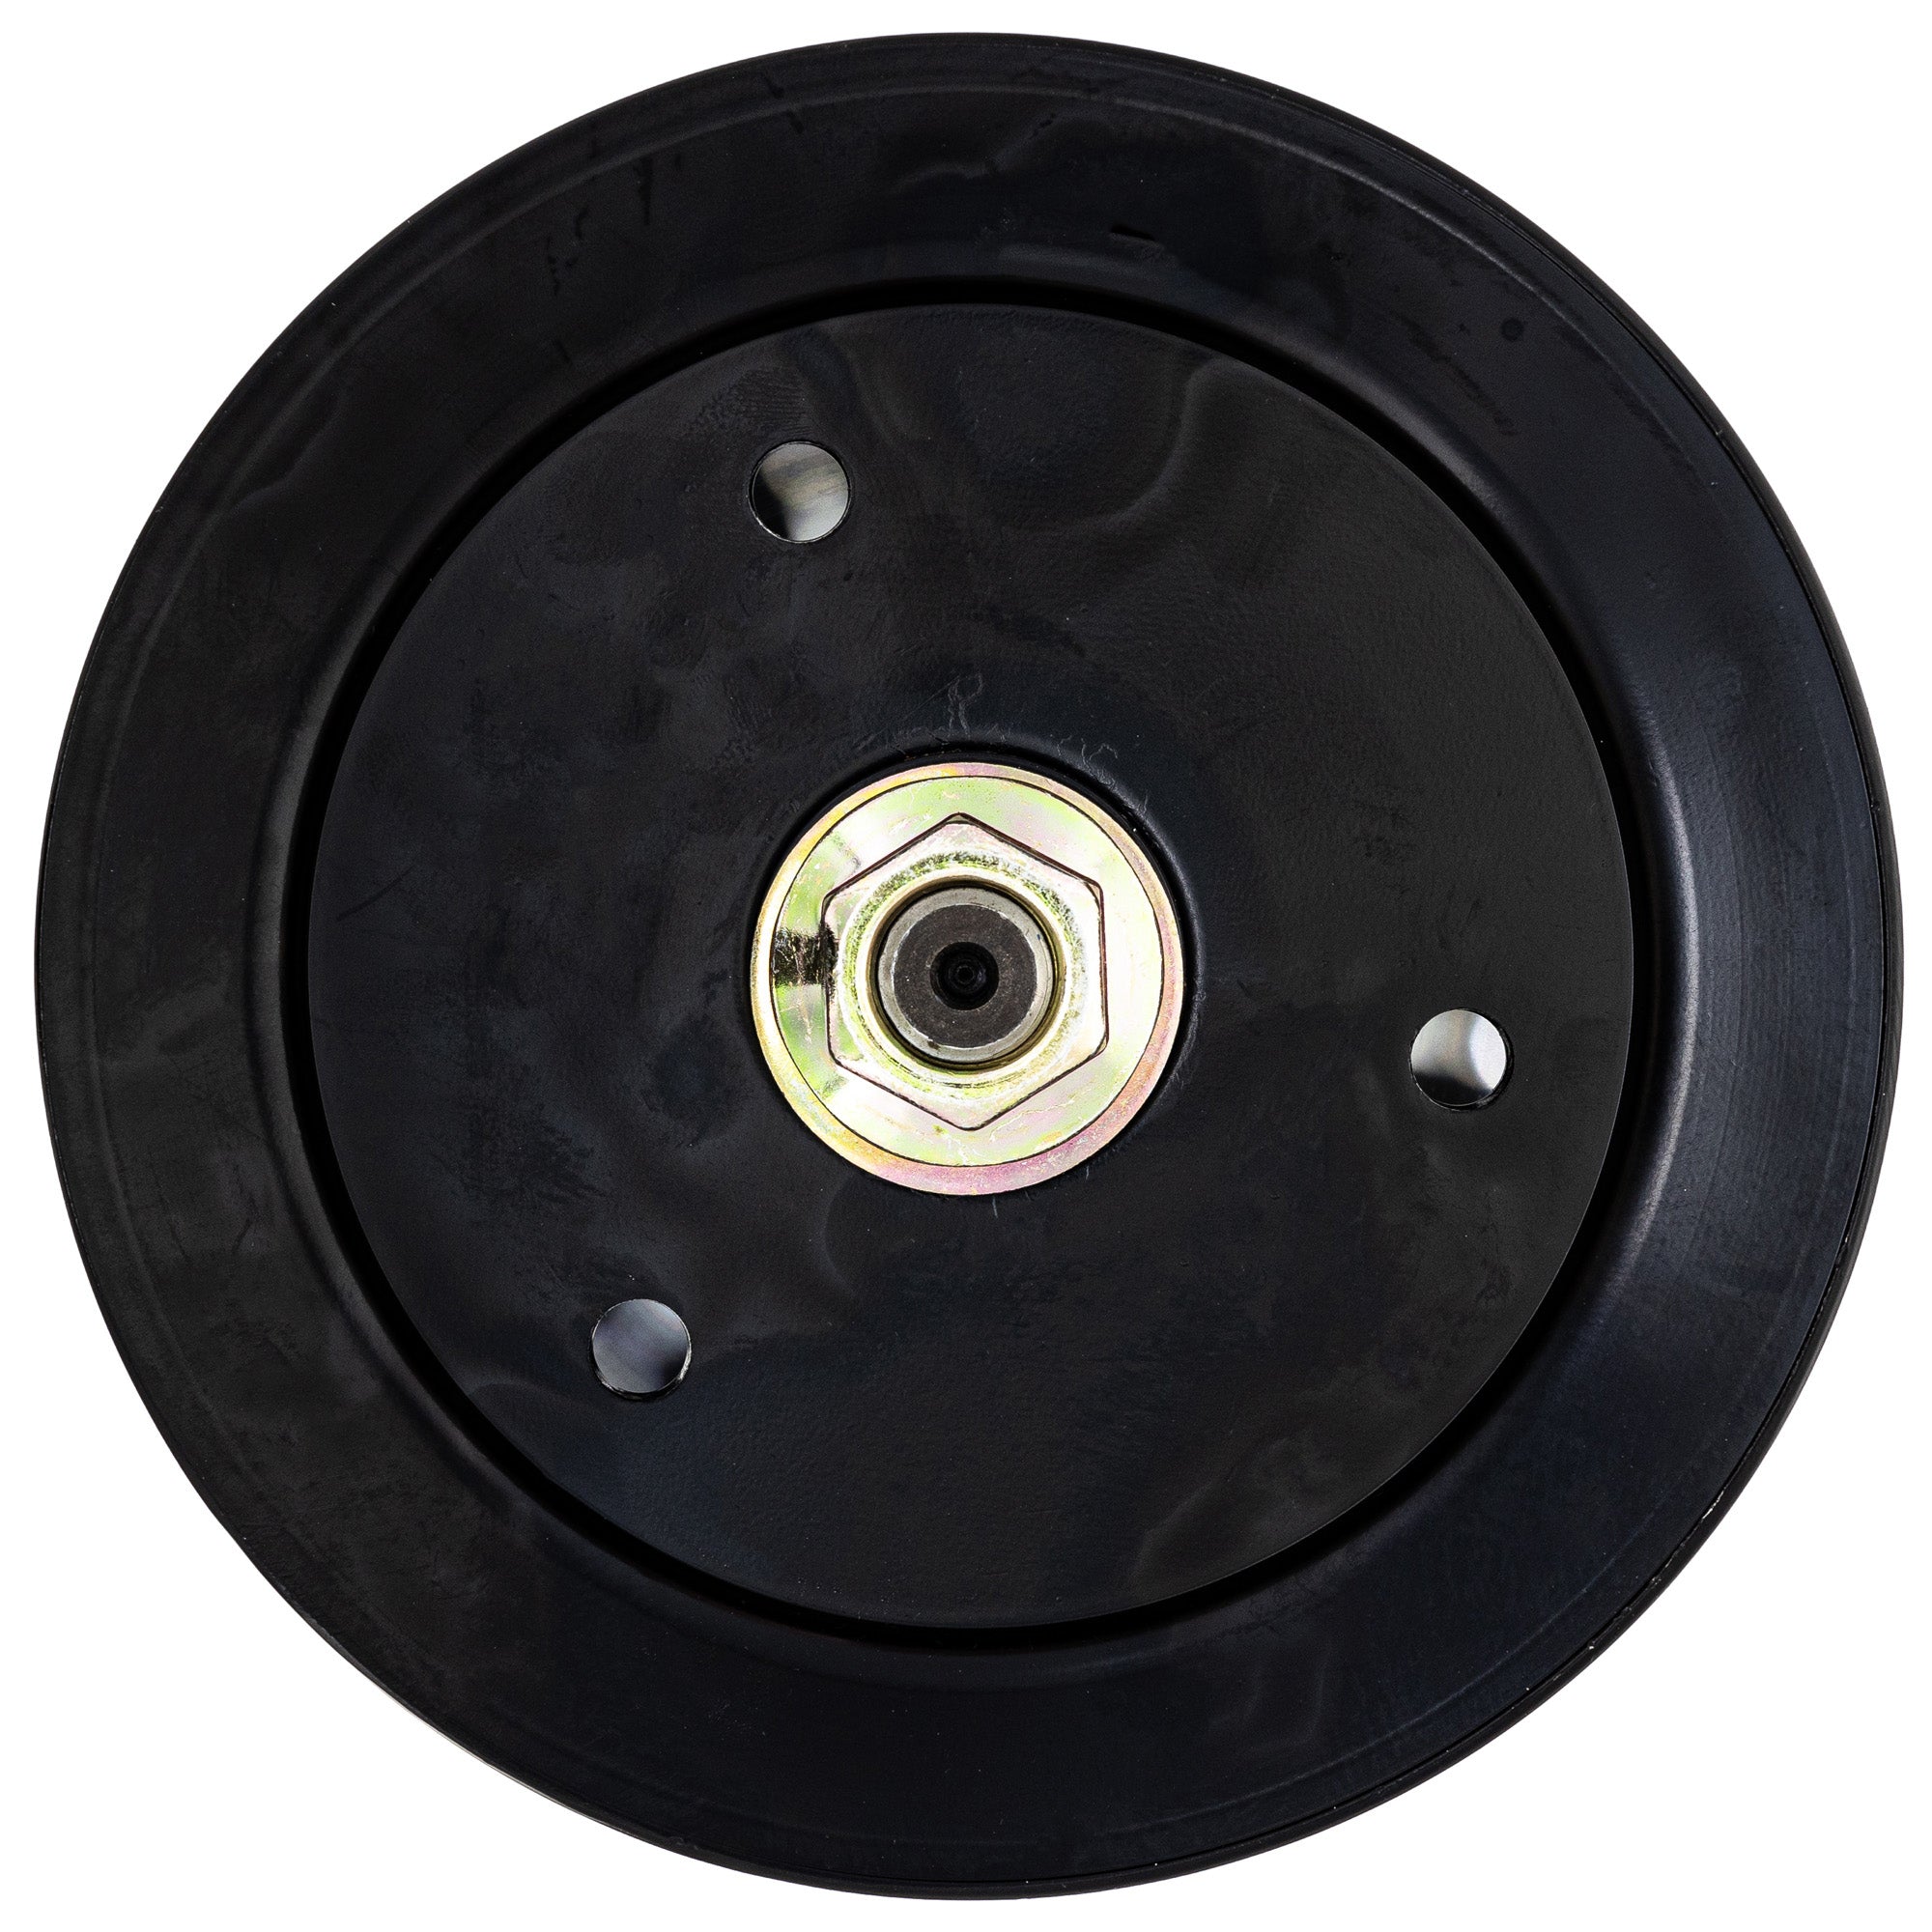 Mower Spindle for Exmark Lazer Z XP 103-8280 1-633686 60-Inch Deck 3